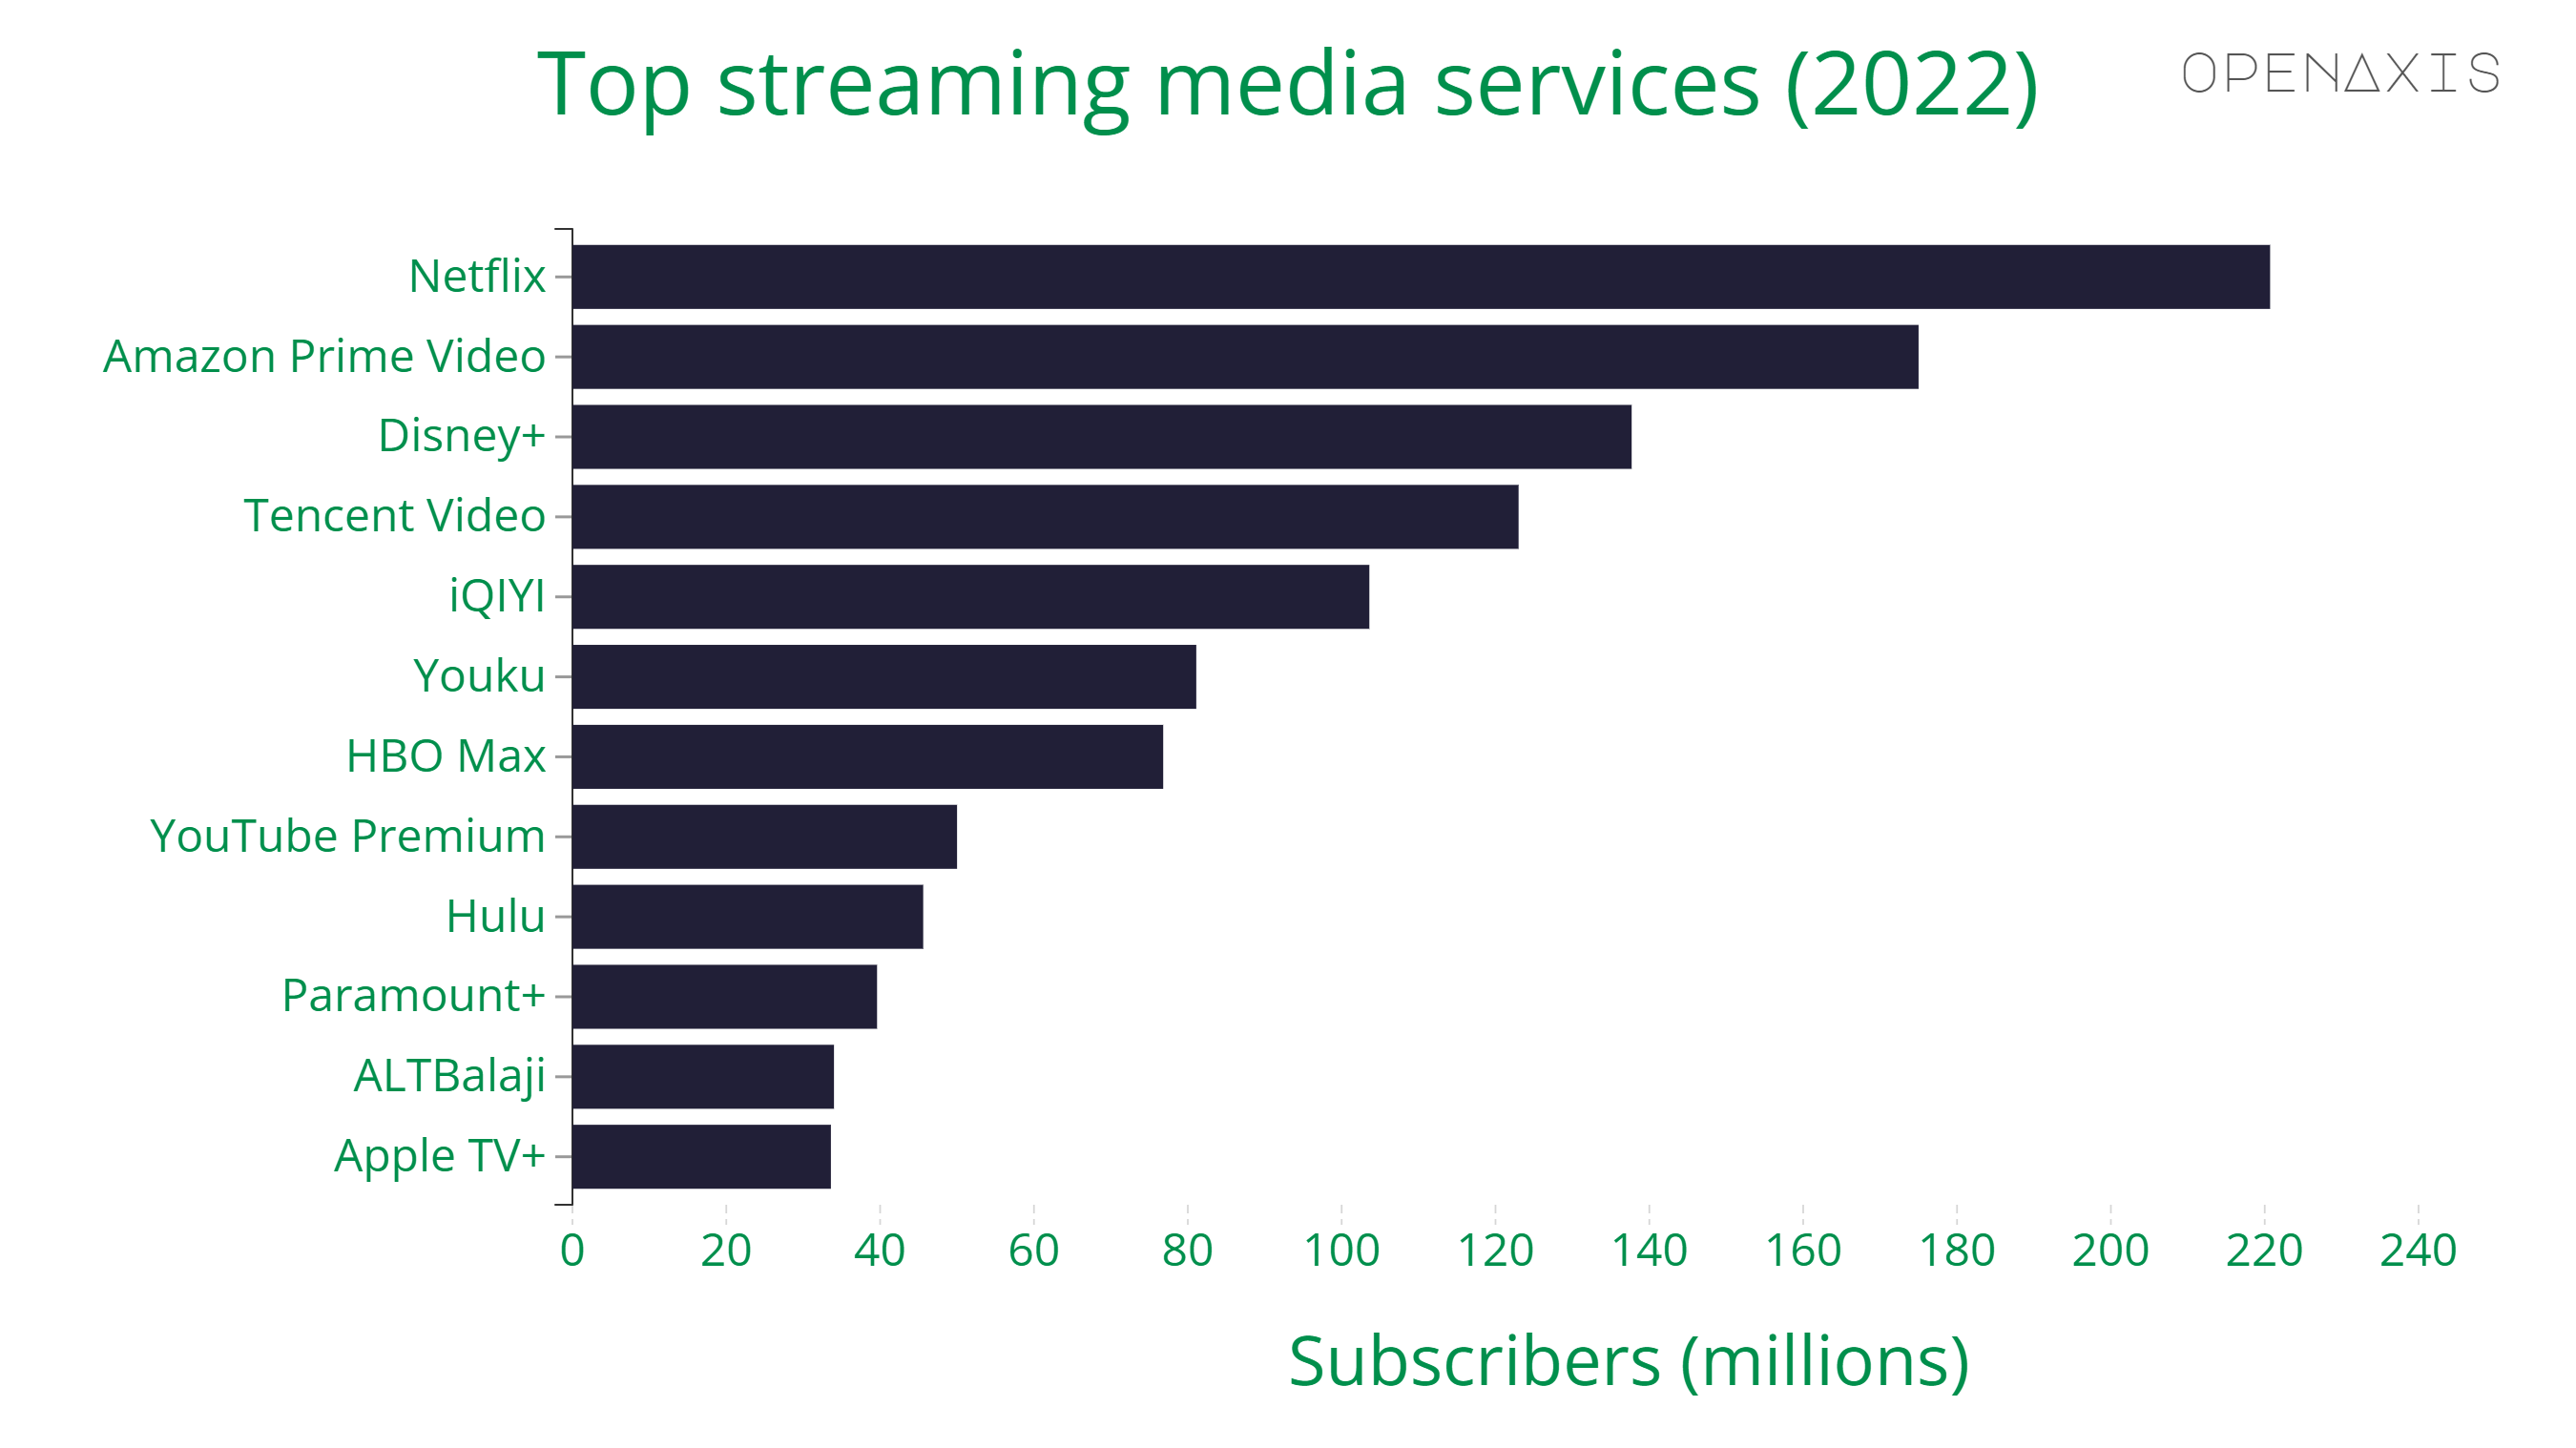 "Top streaming media services (2022)"